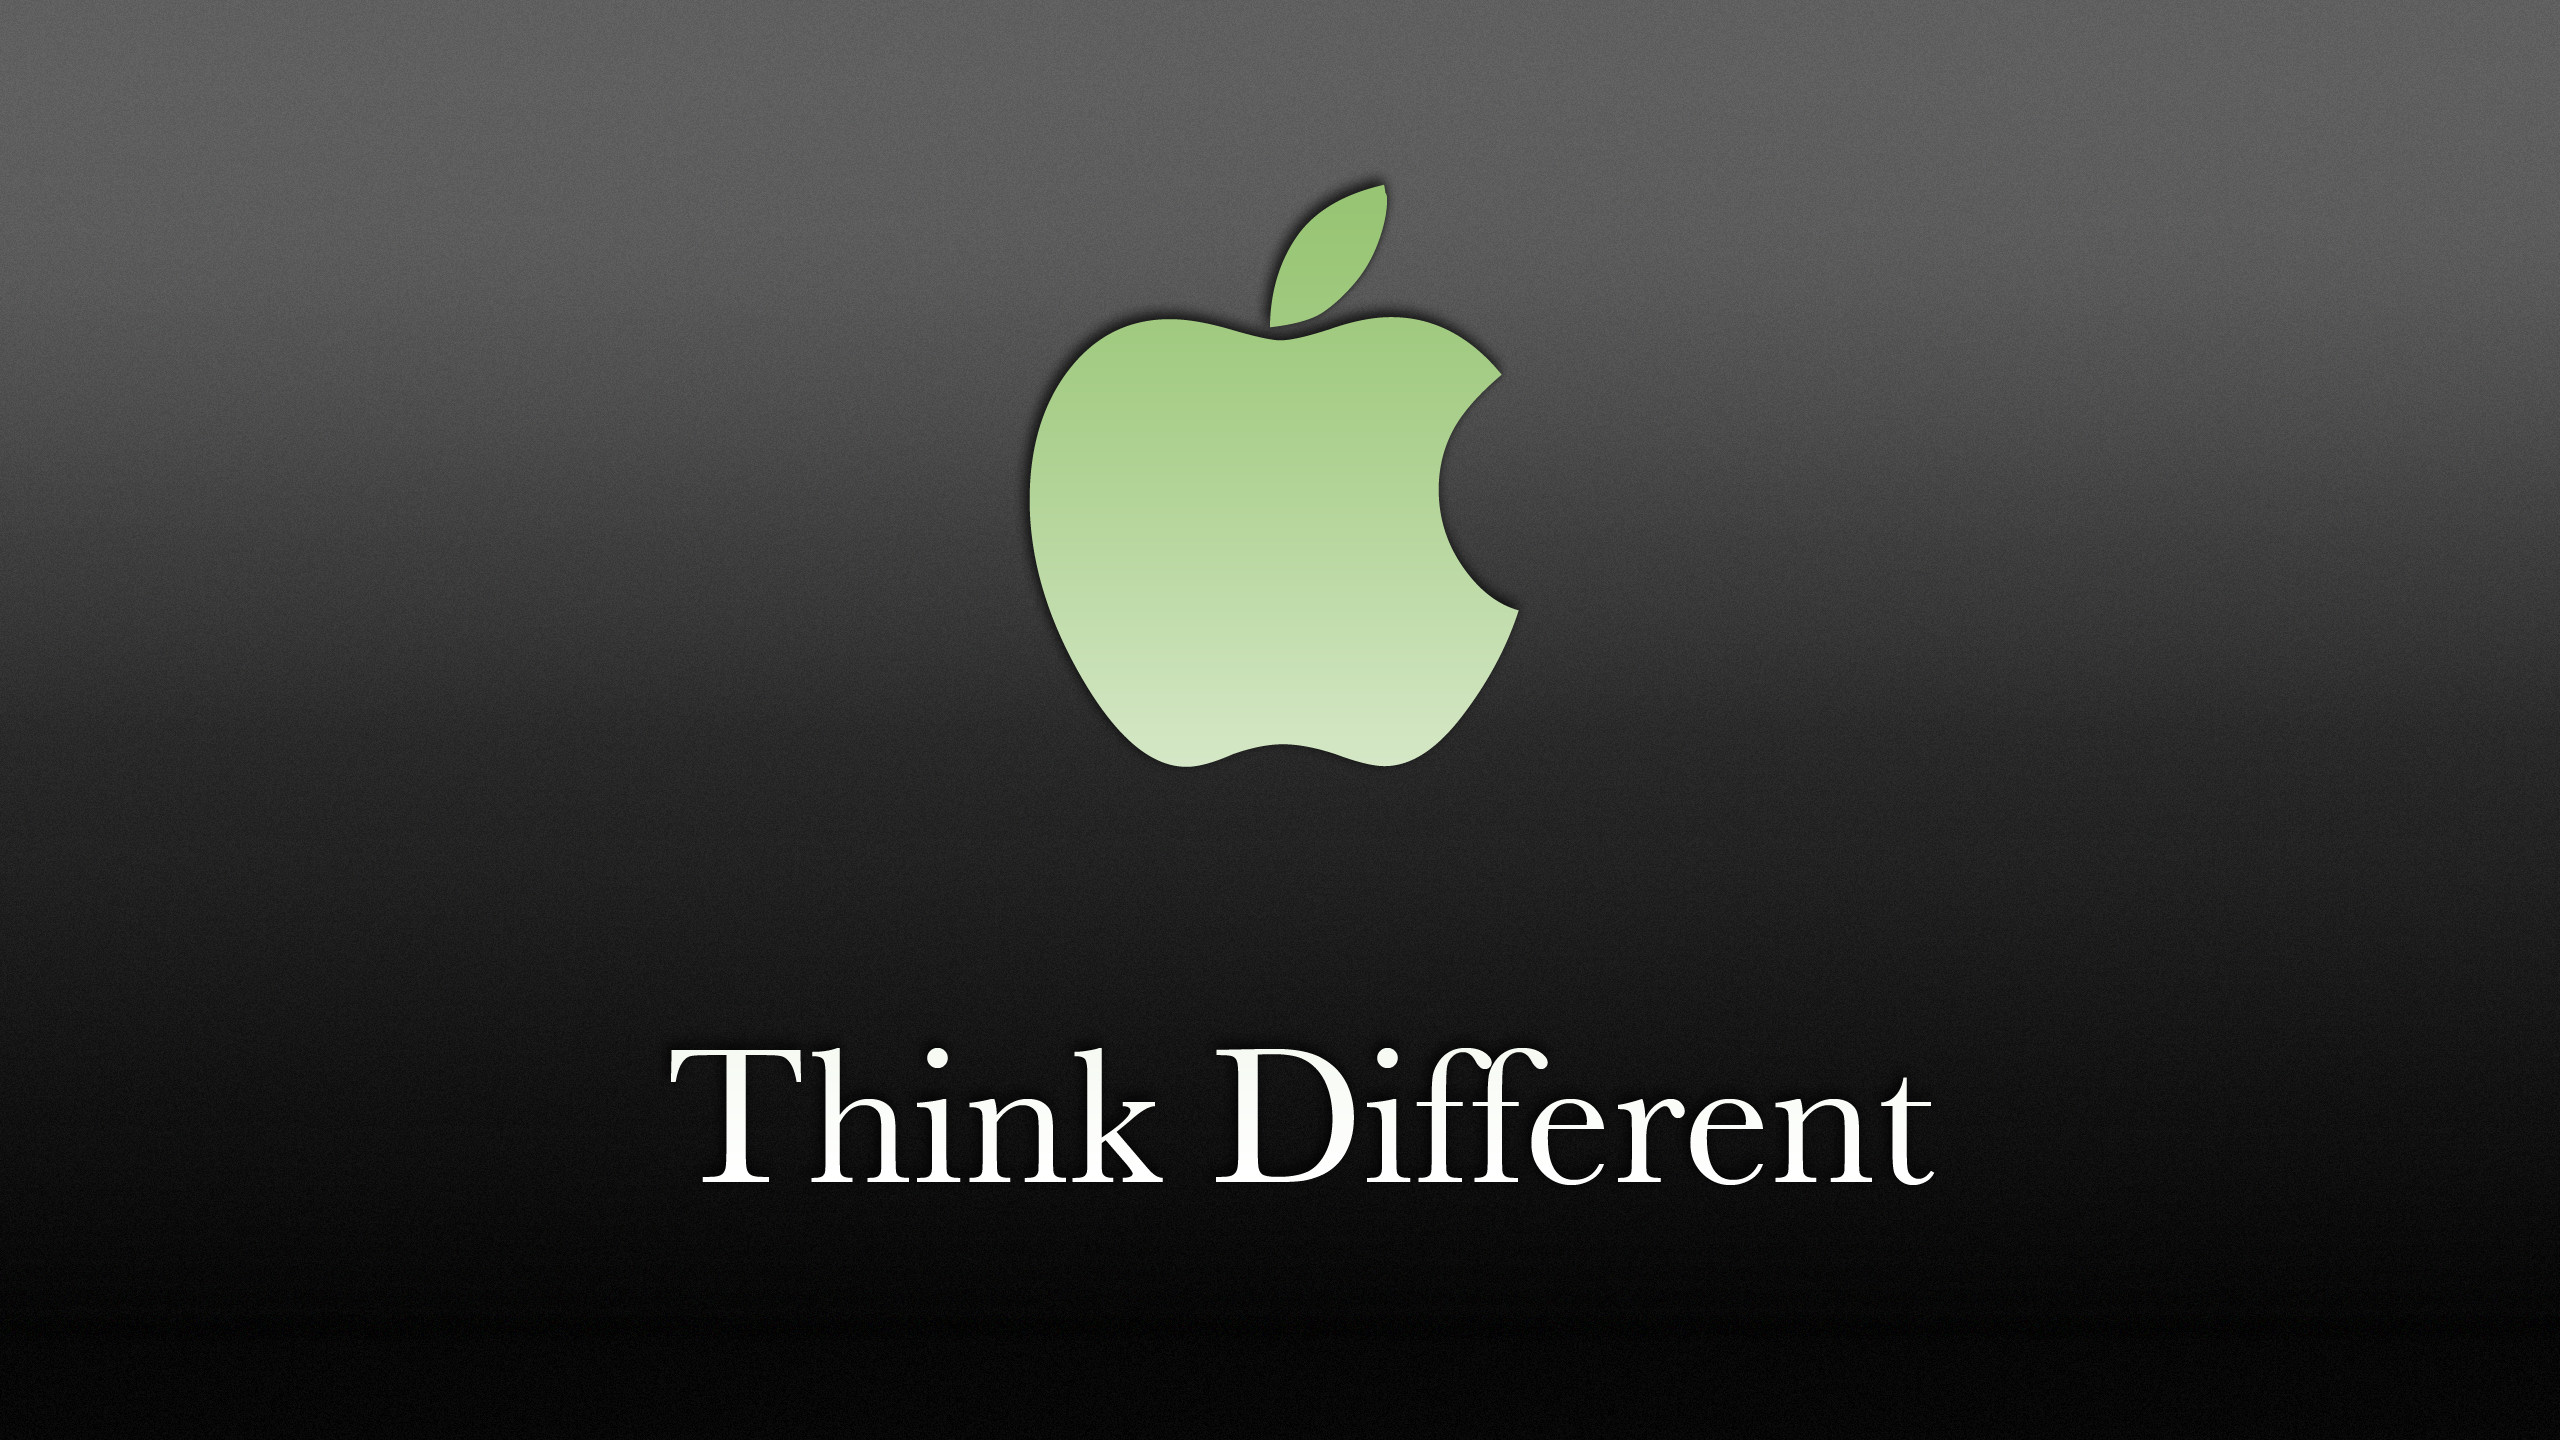 2560x1440 Think Different - HD by Anavirn Think Different - HD by Anavirn